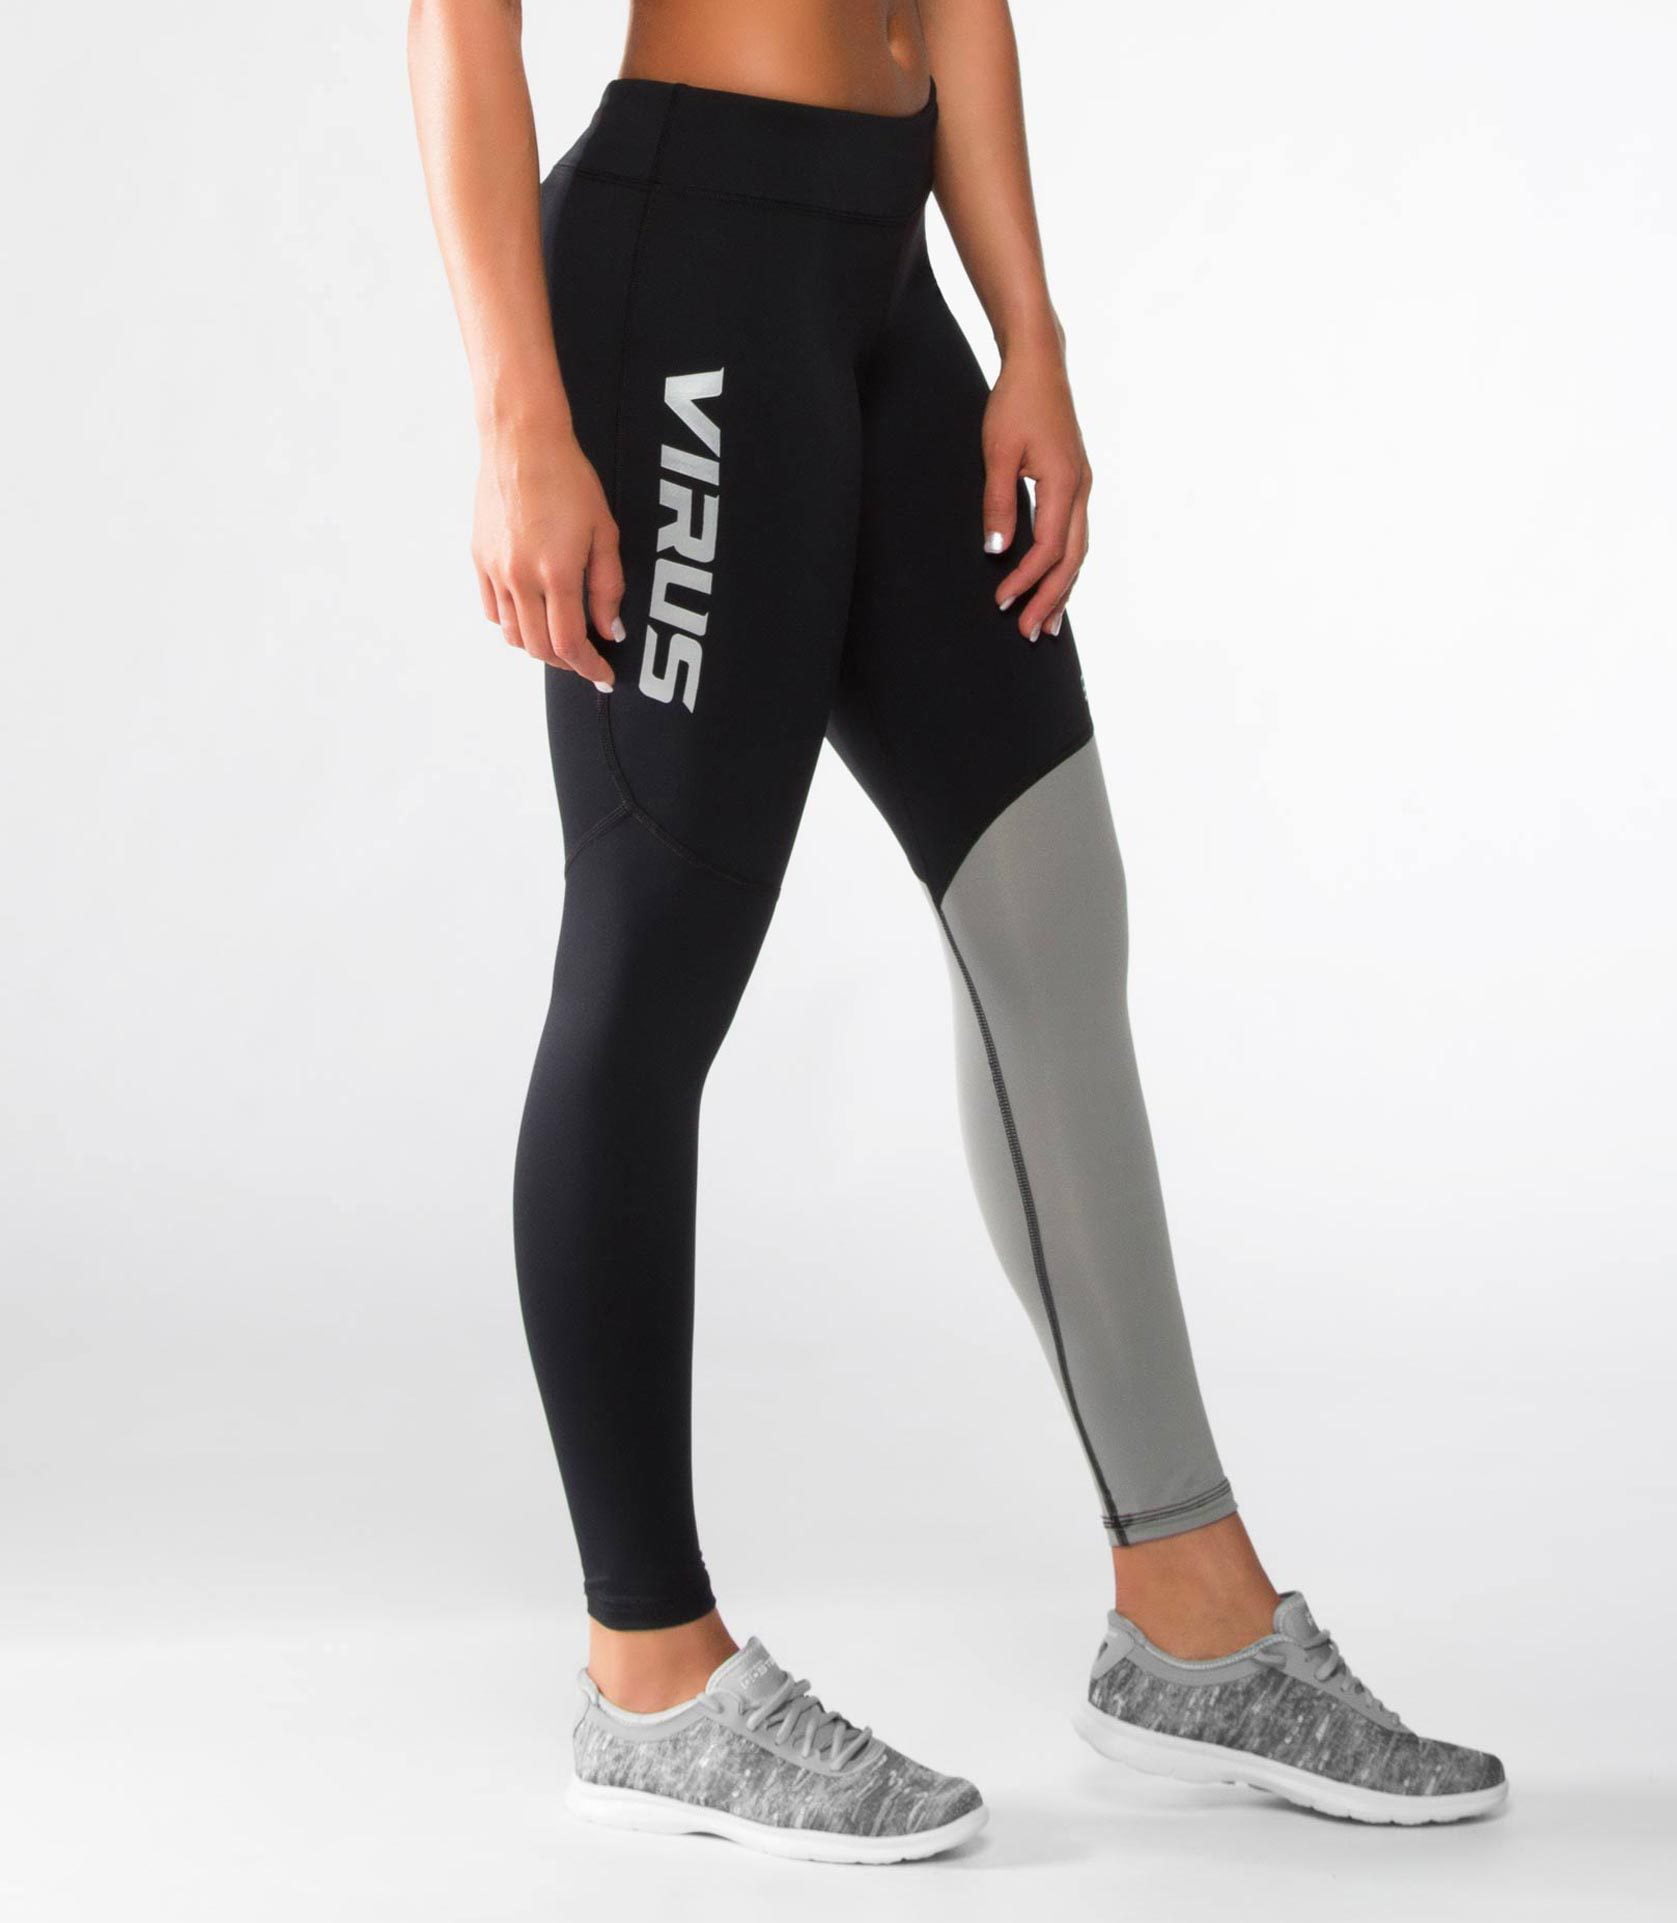 Virus, ECO42 Sonic Stay Cool Compression Pant